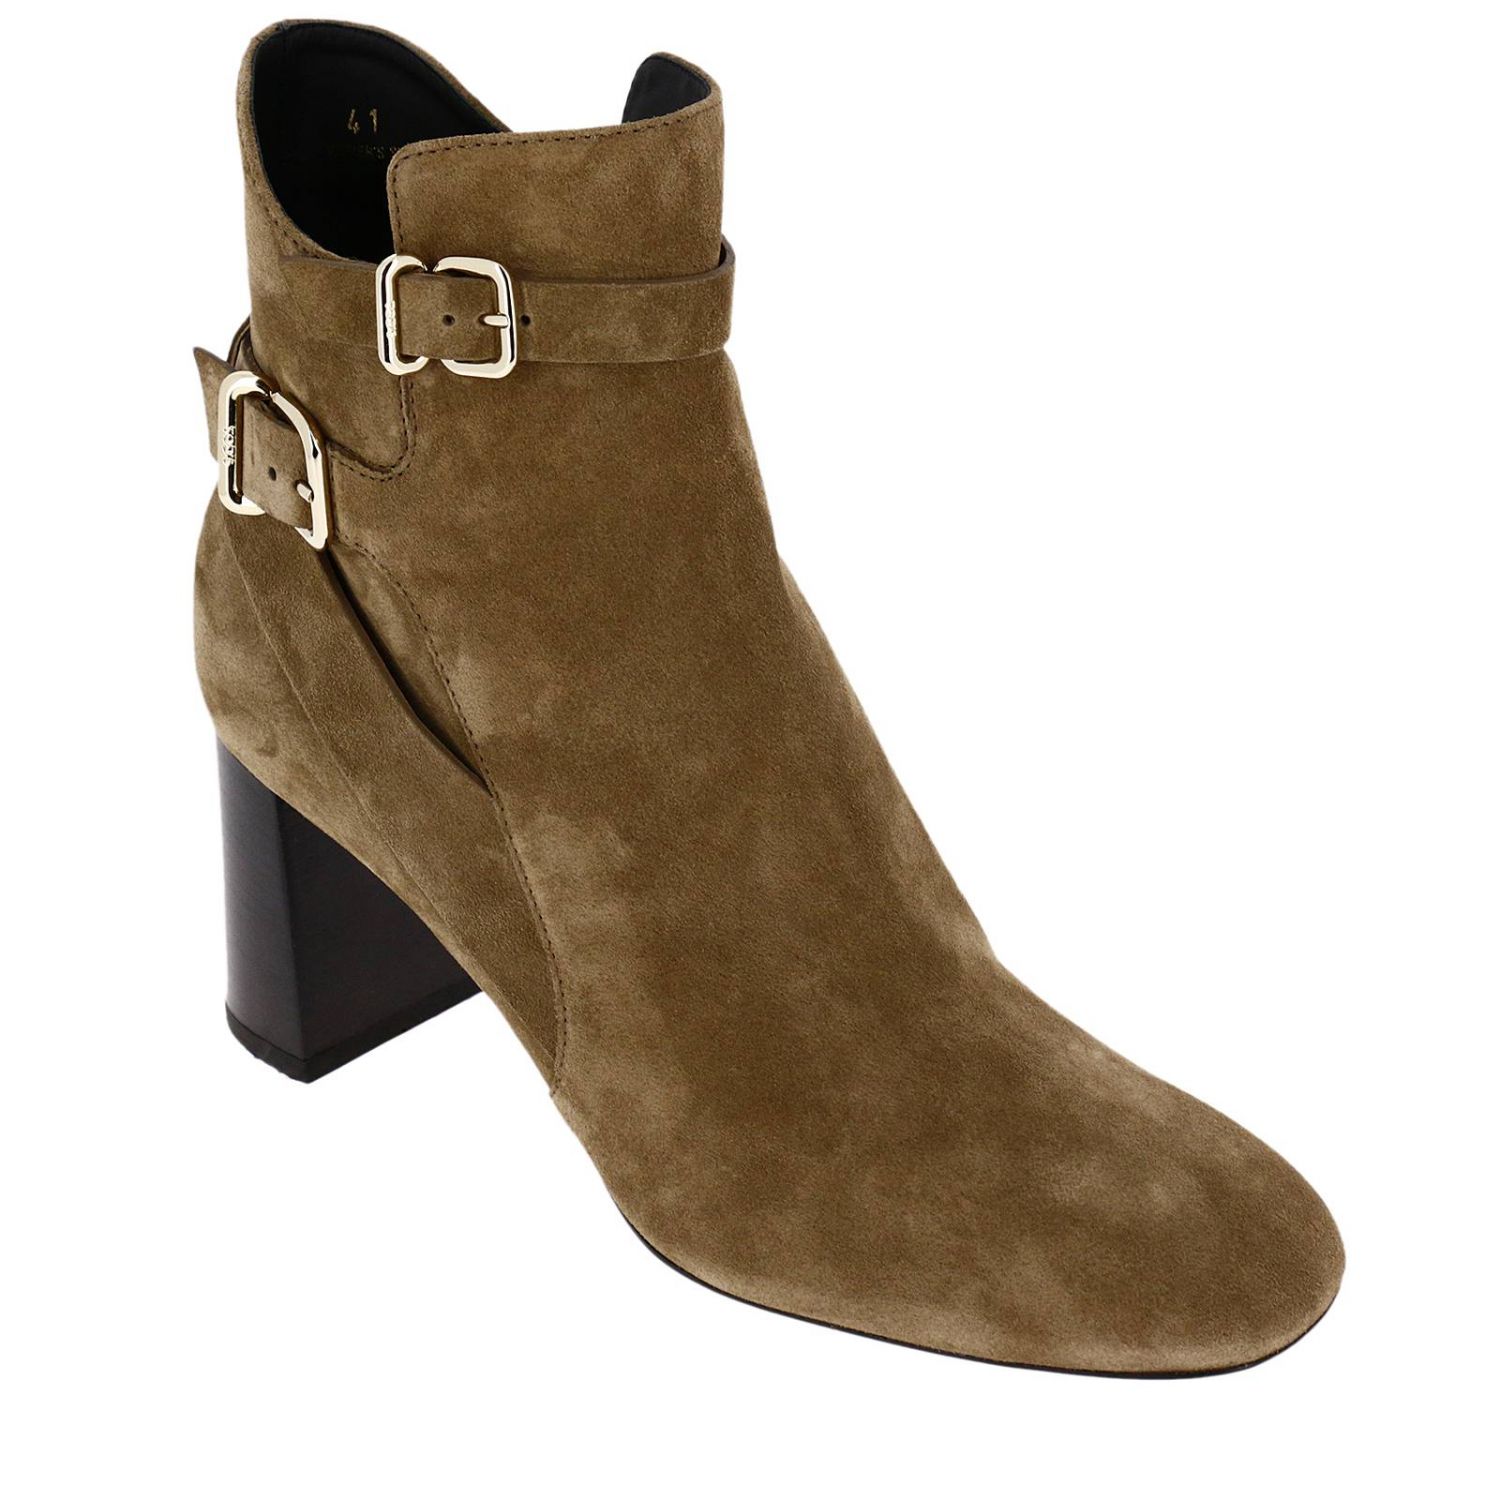 Tods Outlet: Shoes women Tod's | Heeled Booties Tods Women Hazel ...